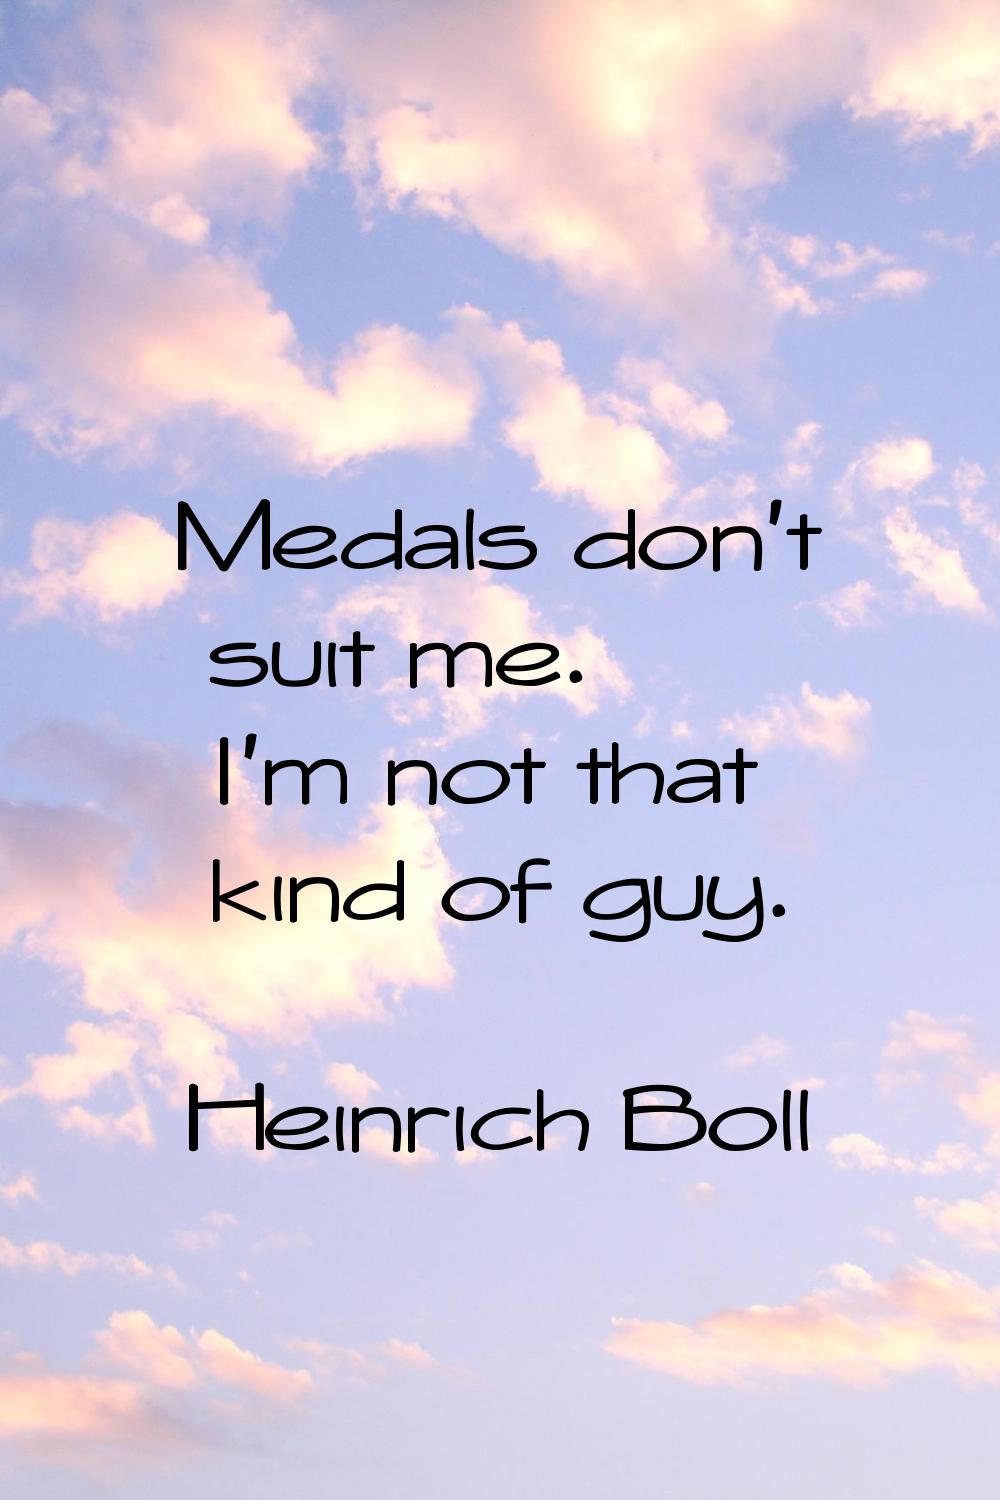 Medals don't suit me. I'm not that kind of guy.